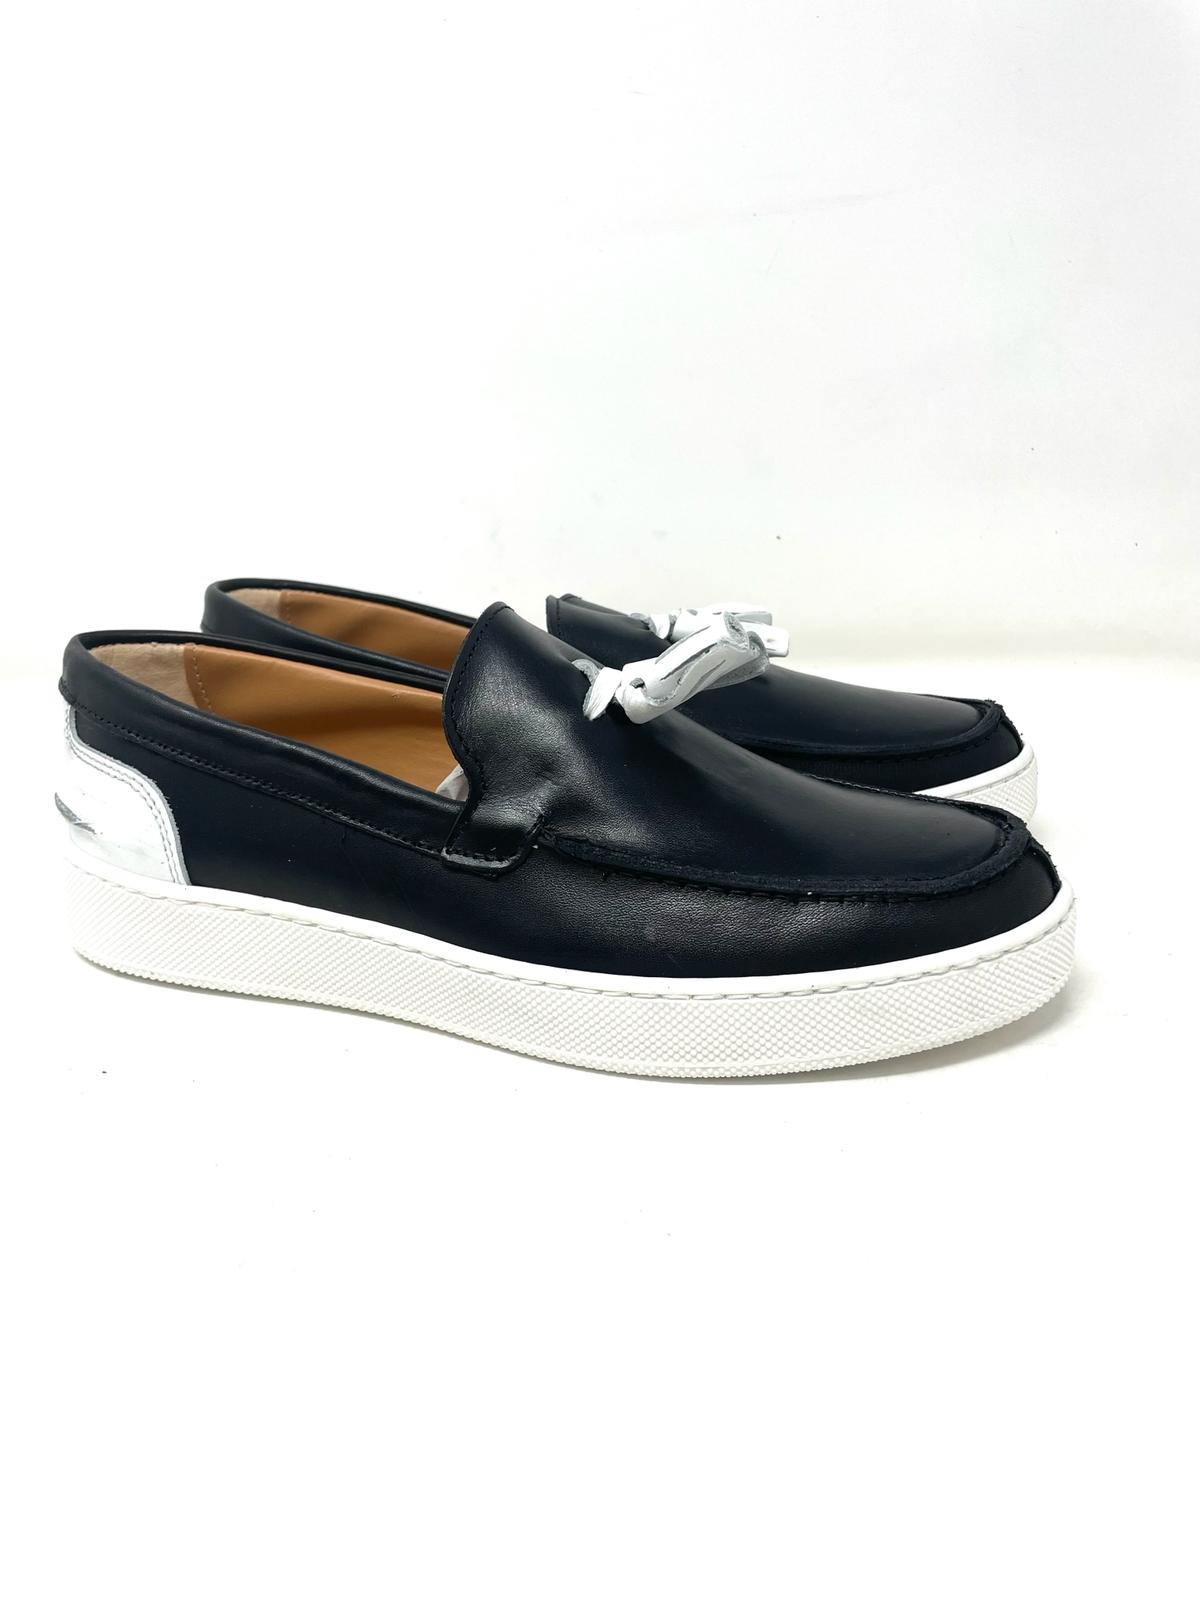 Two-tone leather tassel boat moccasin with stitched rubber sole